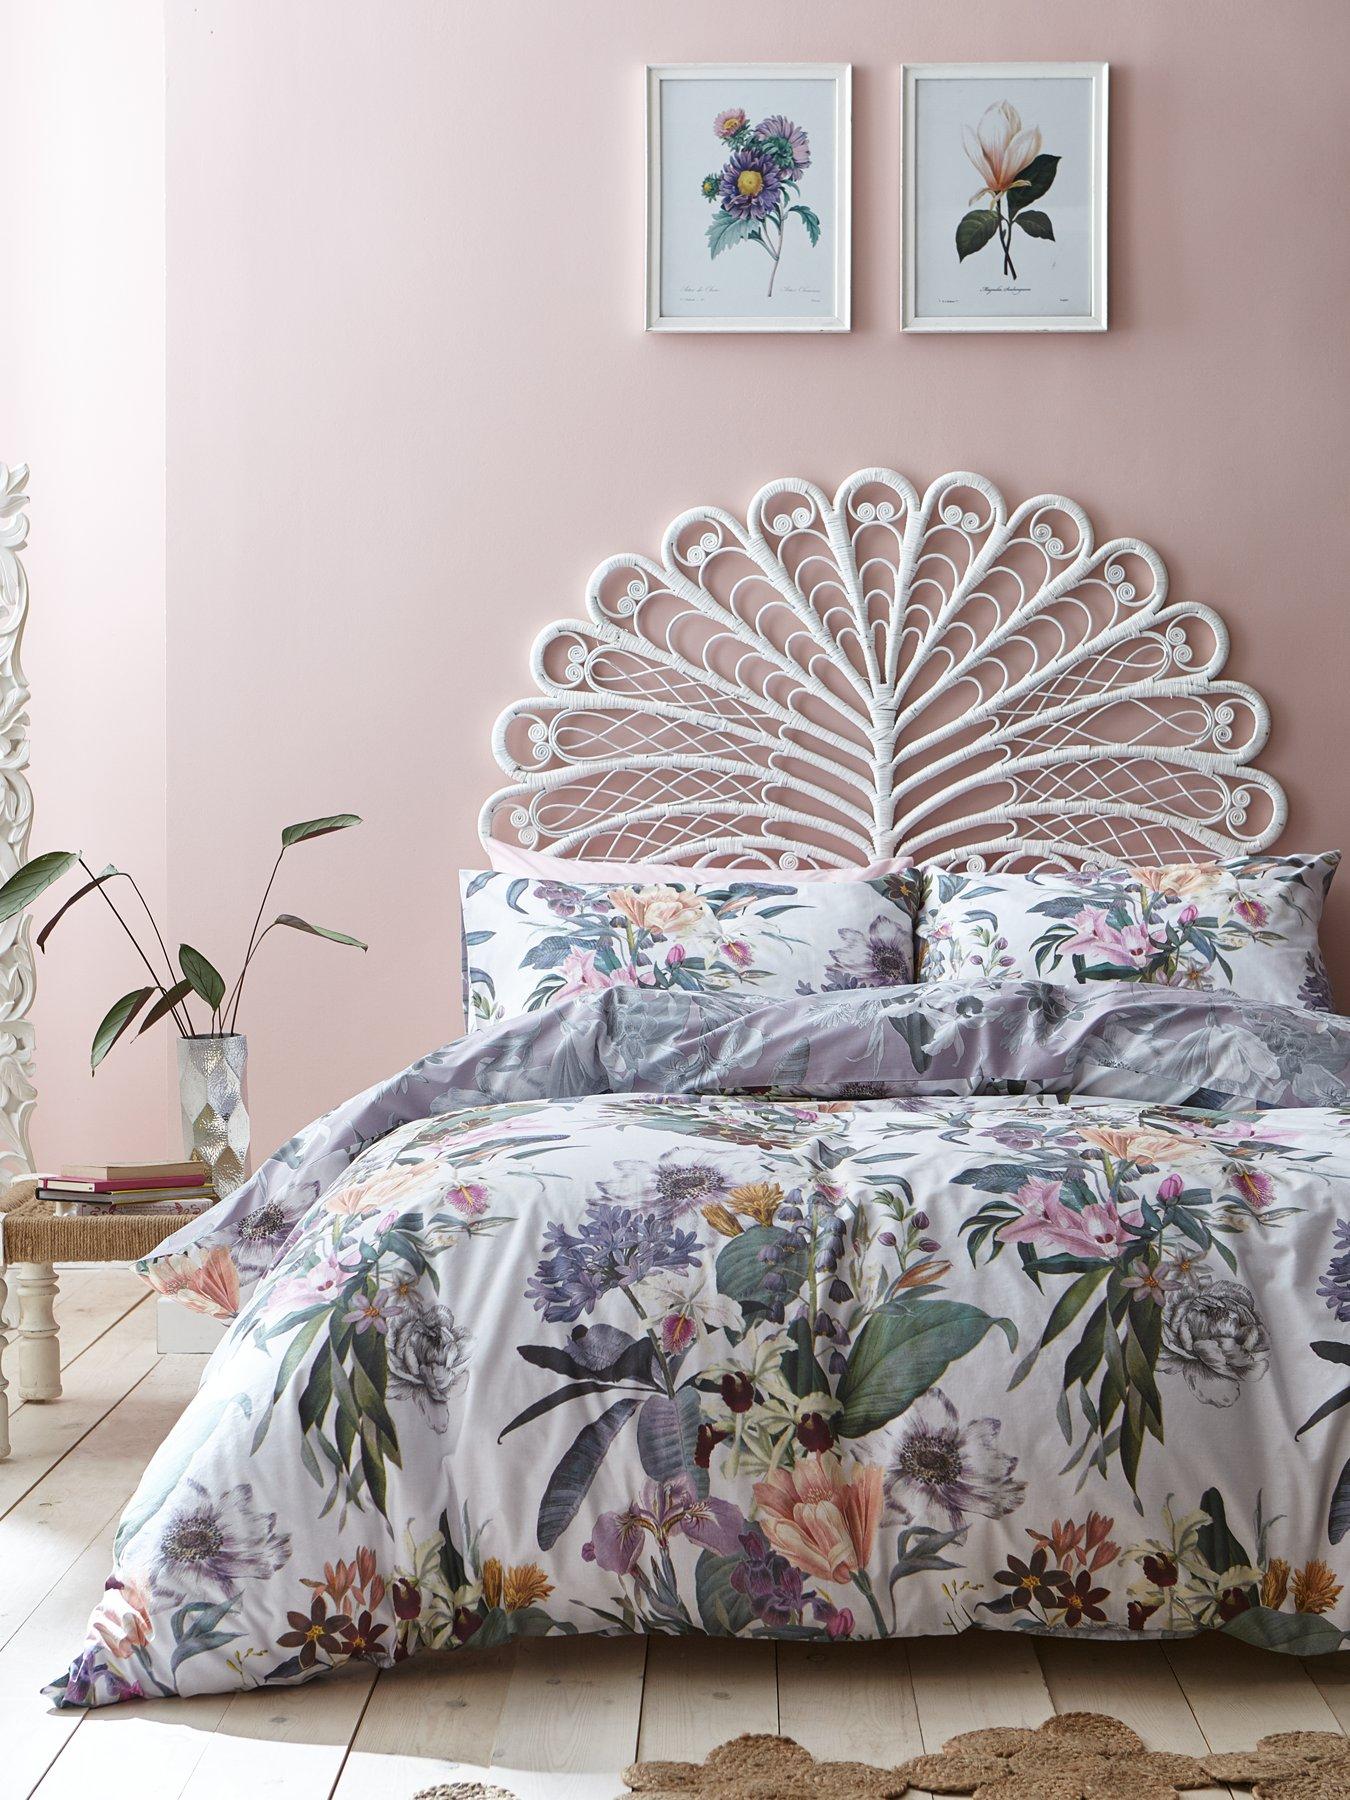 Patterned Accessorize Bedroom Duvet Covers Bedding Home